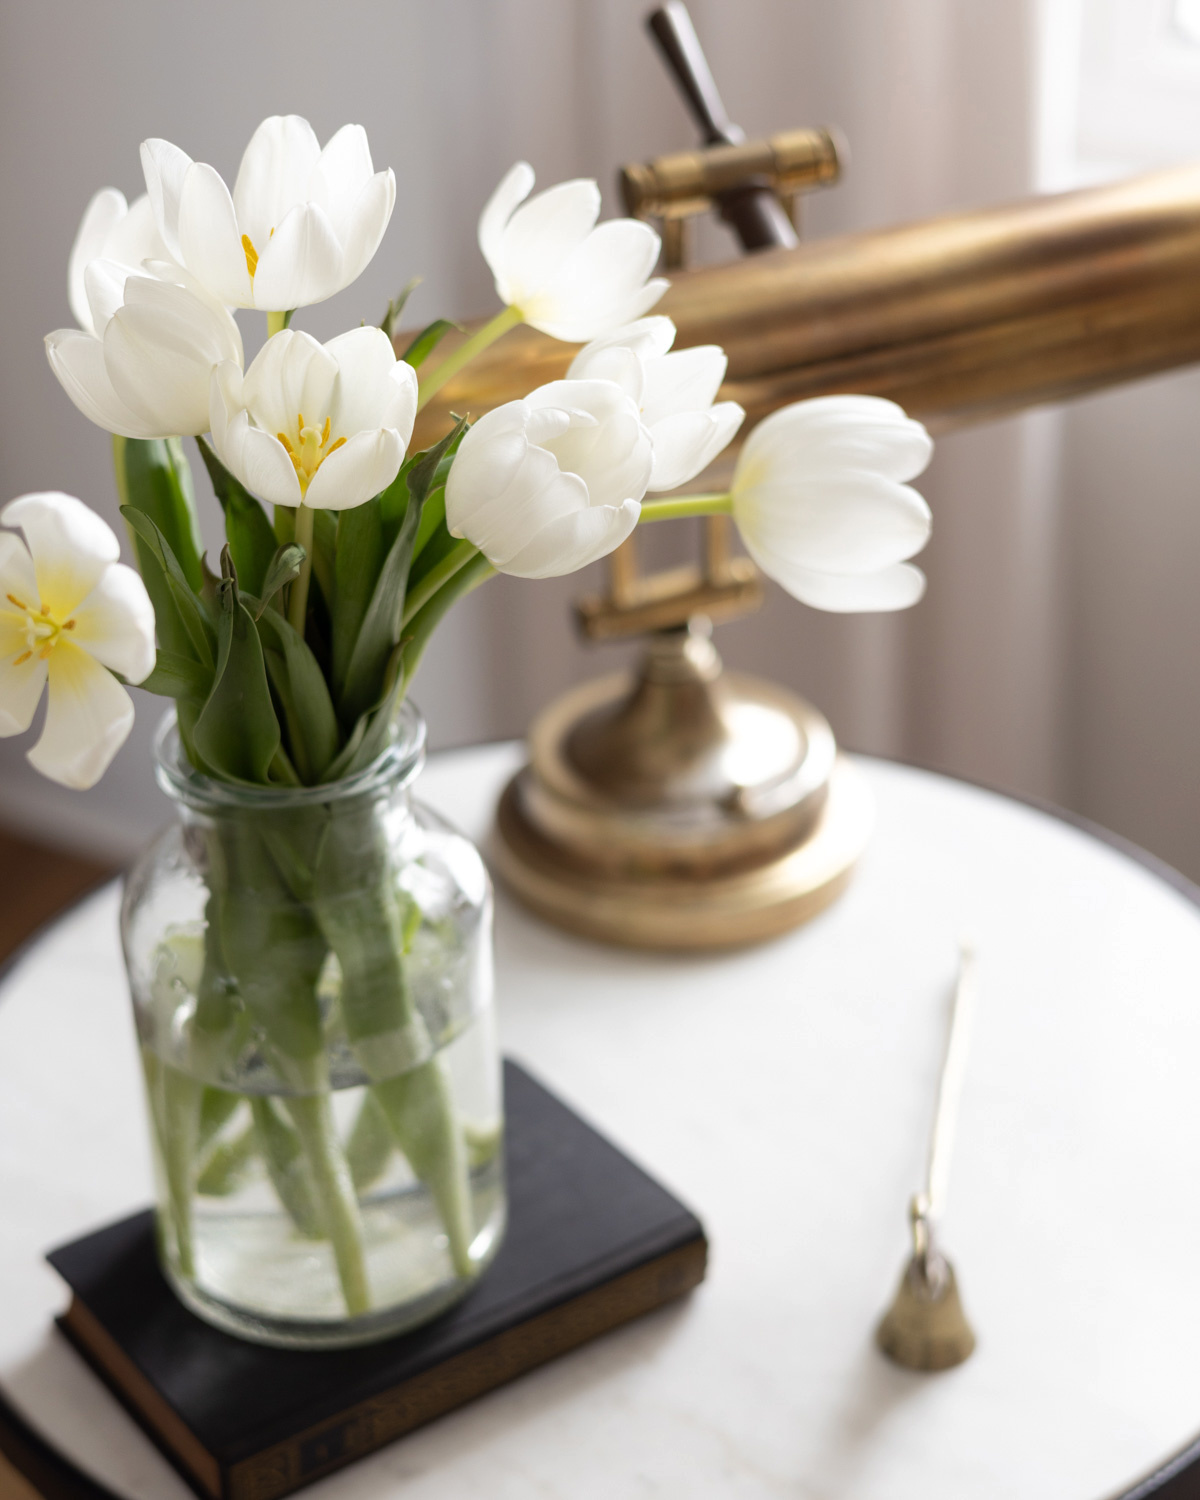 White tulips on a table next to a brass lamp.